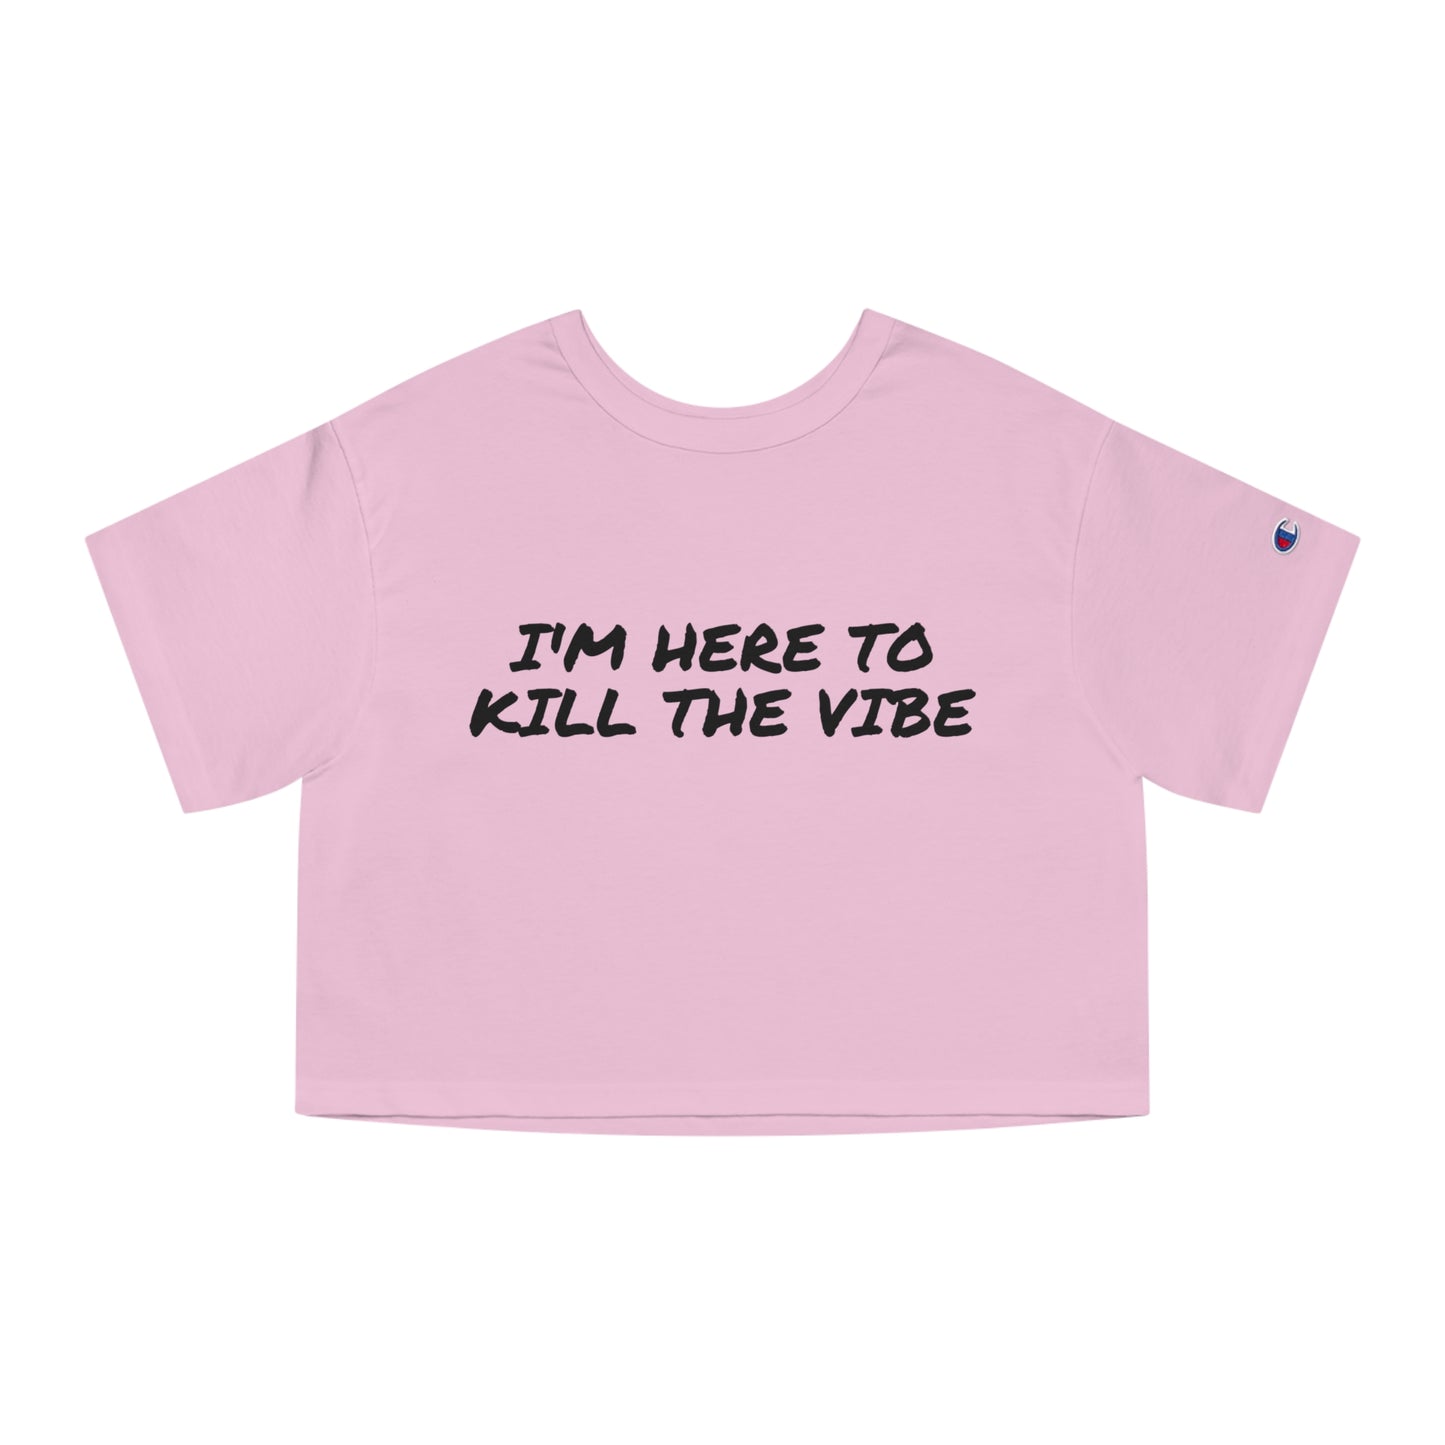 "I'm here to kill the vibe" - Champion™ crop top